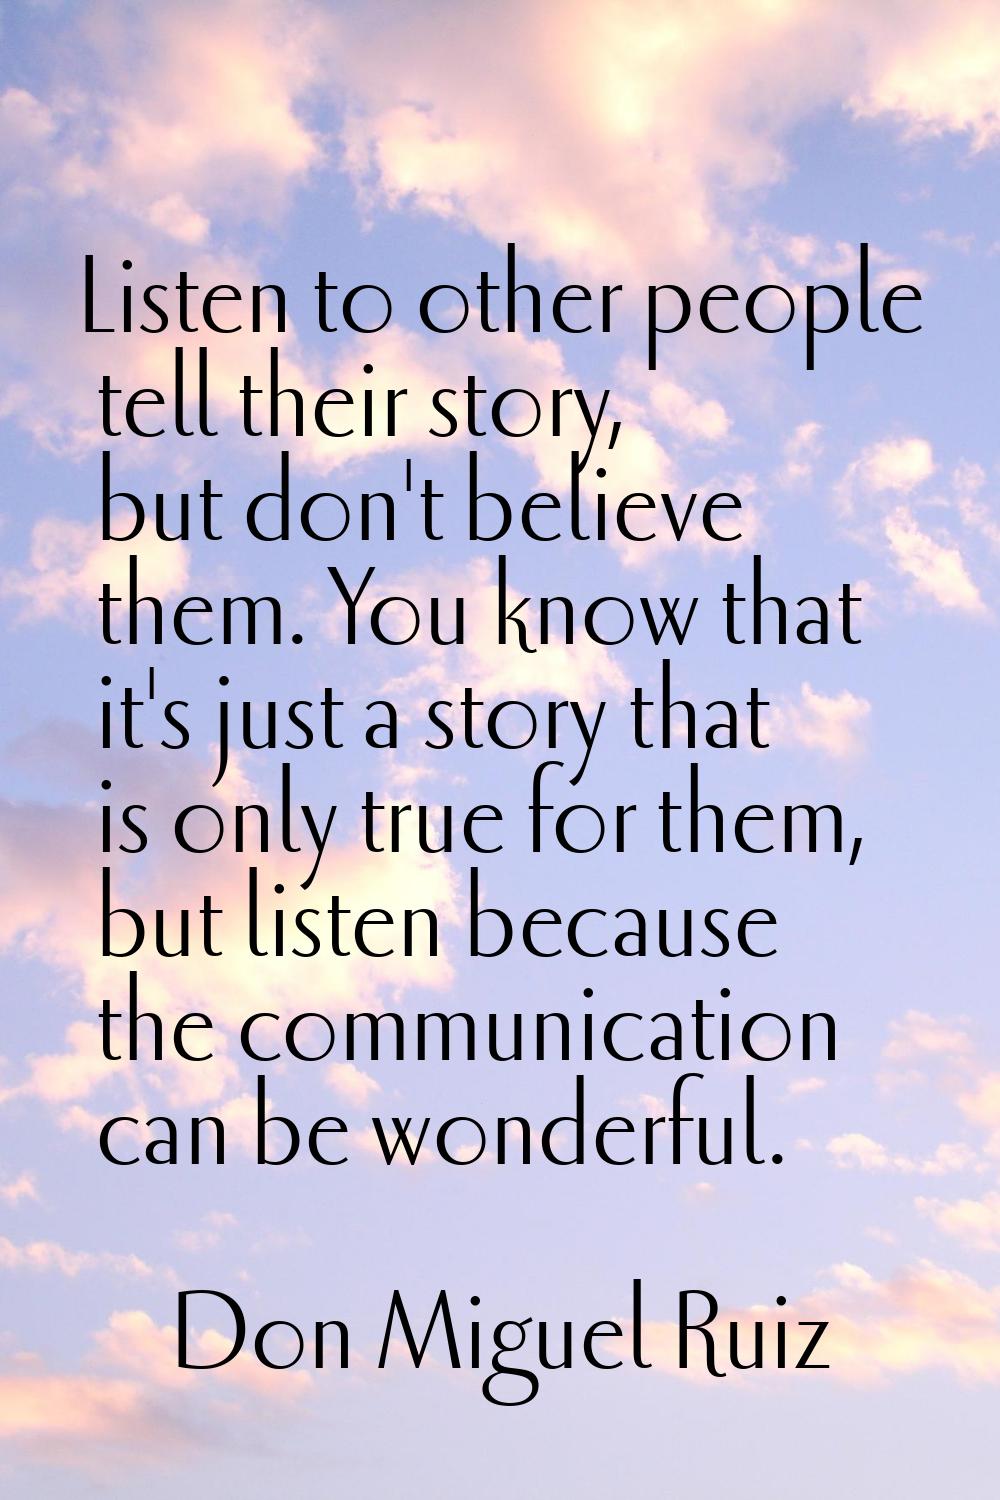 Listen to other people tell their story, but don't believe them. You know that it's just a story th